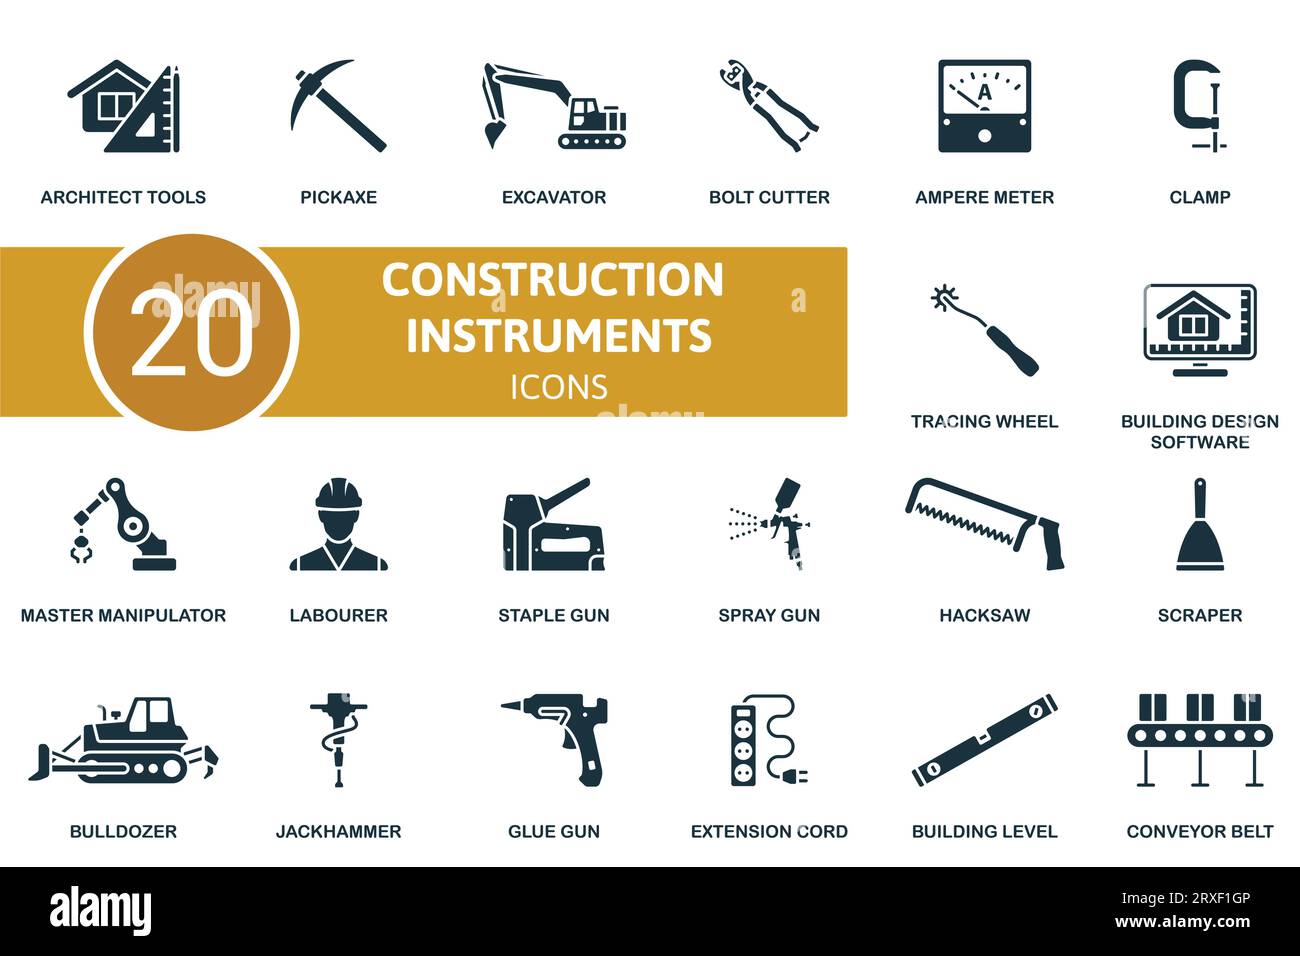 Construction instruments set. Creative icons architect tools, pickaxe, excavator, bolt cutter, ampere meter, clamp, tracing wheel, building design Stock Vector